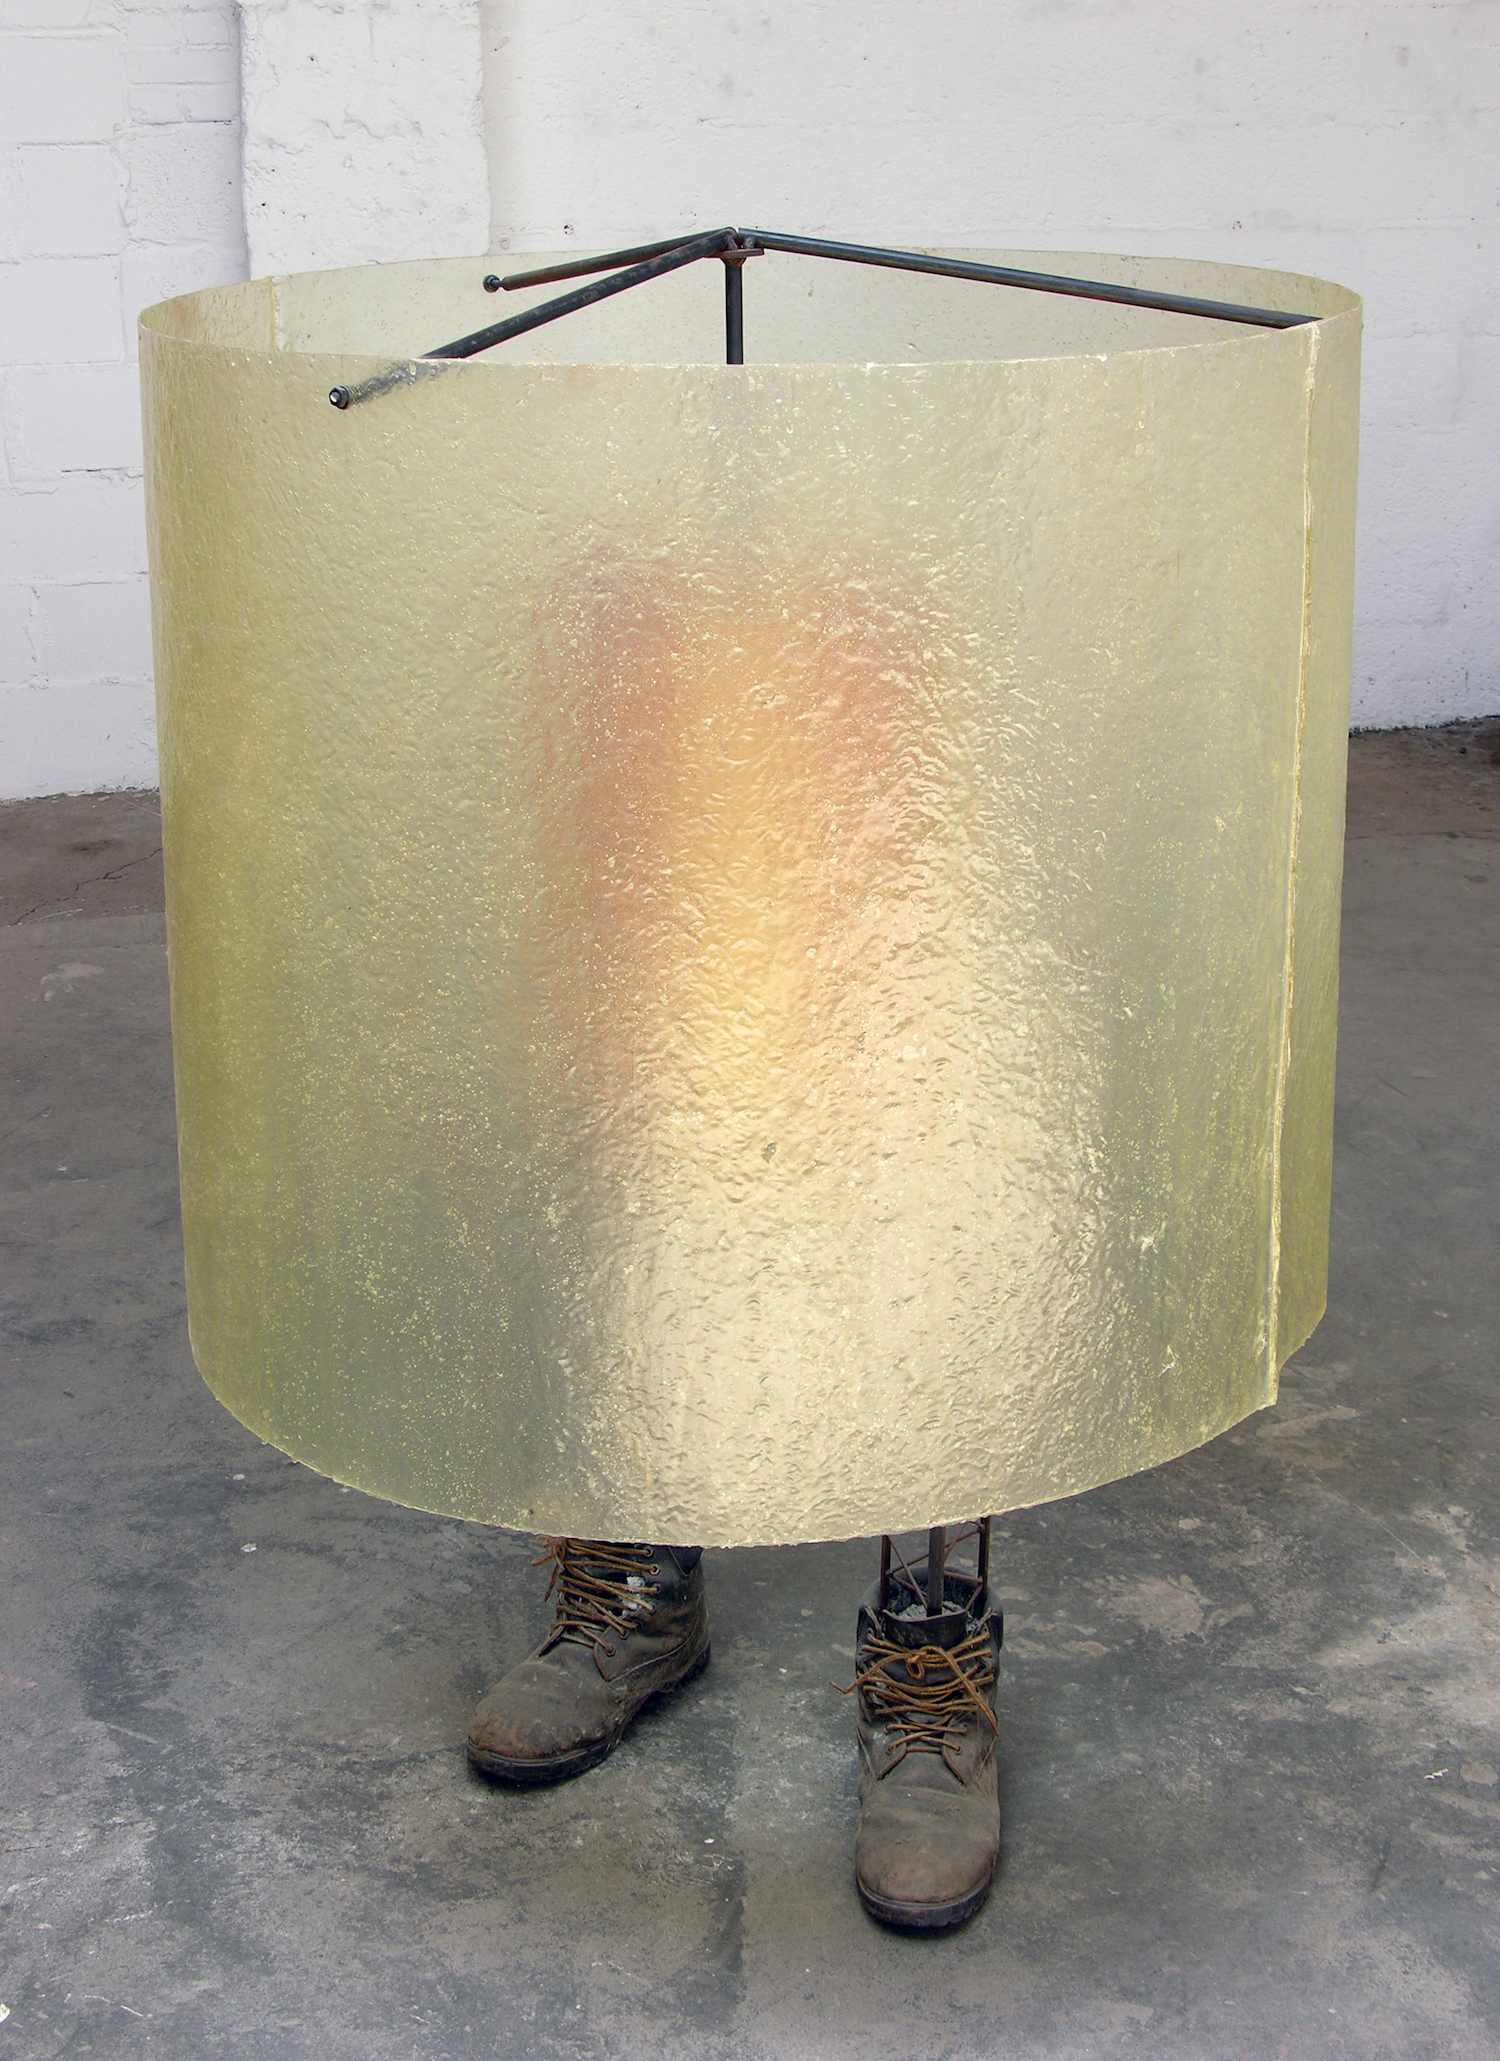  Lampshade (2000), resin, pigment, steel, concrete and boots 